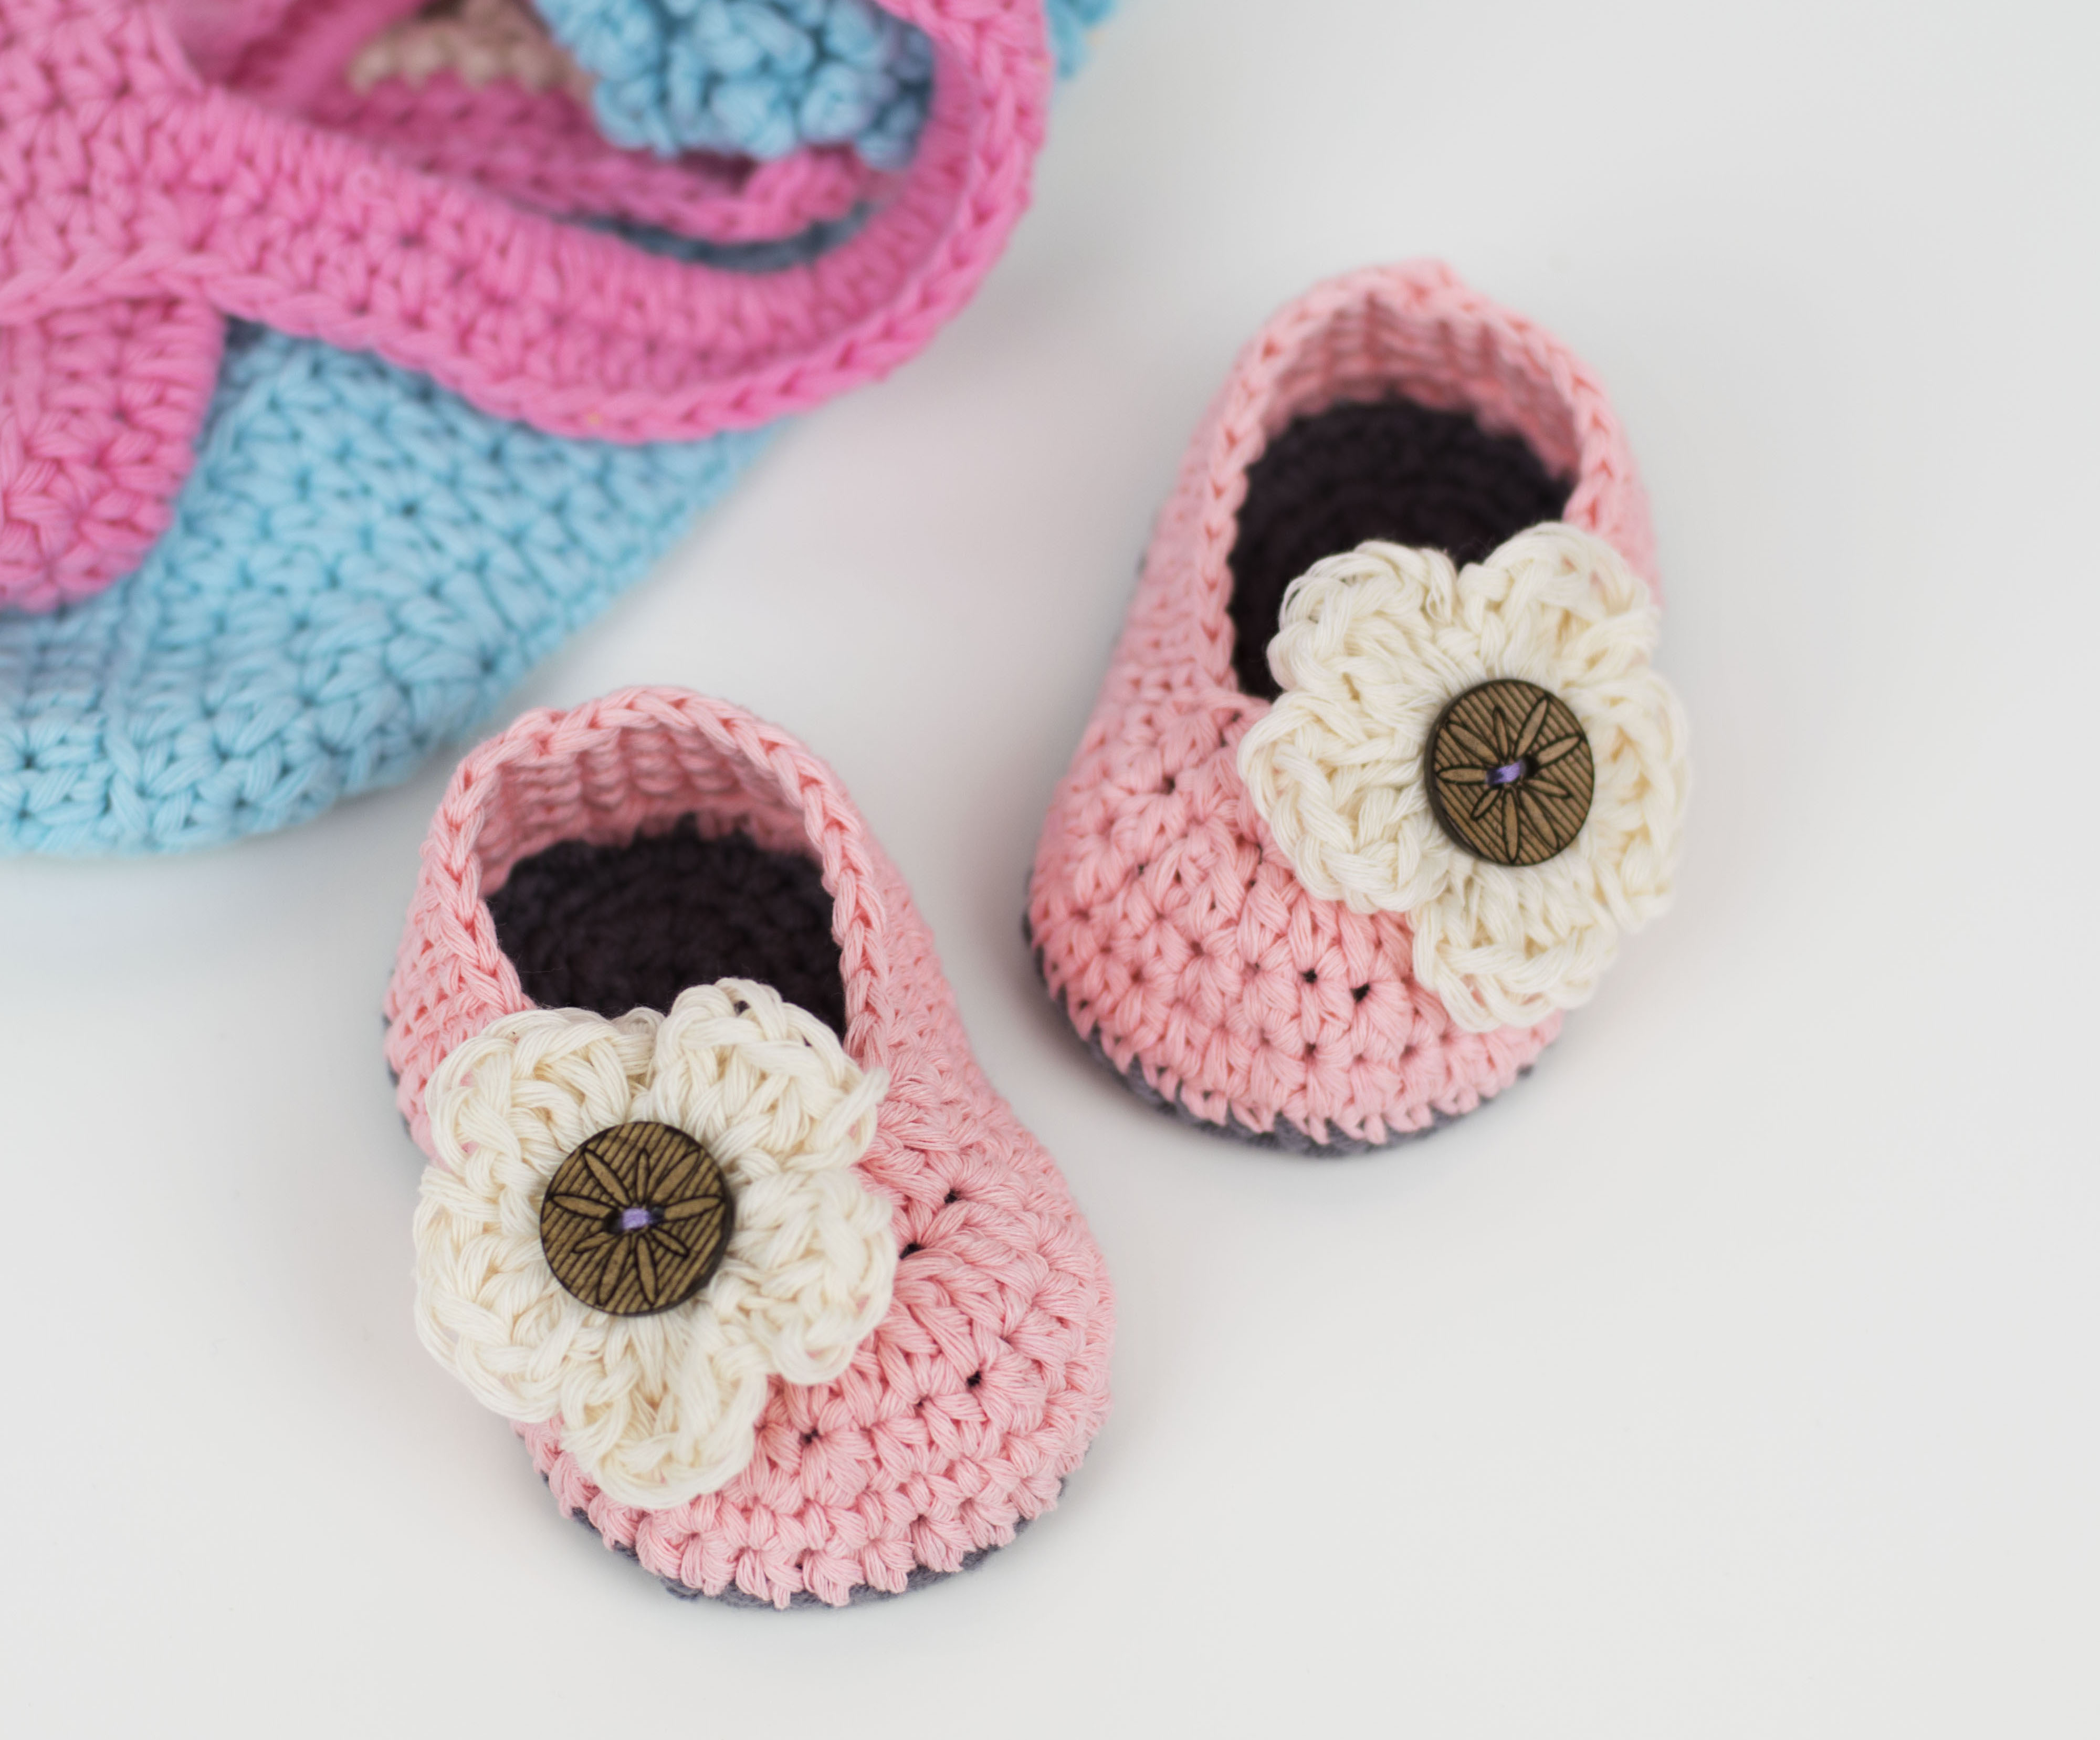 Crochet Pattern For Baby Booties Free Pattern Crochet Ba Booties With Flower Cro Patterns